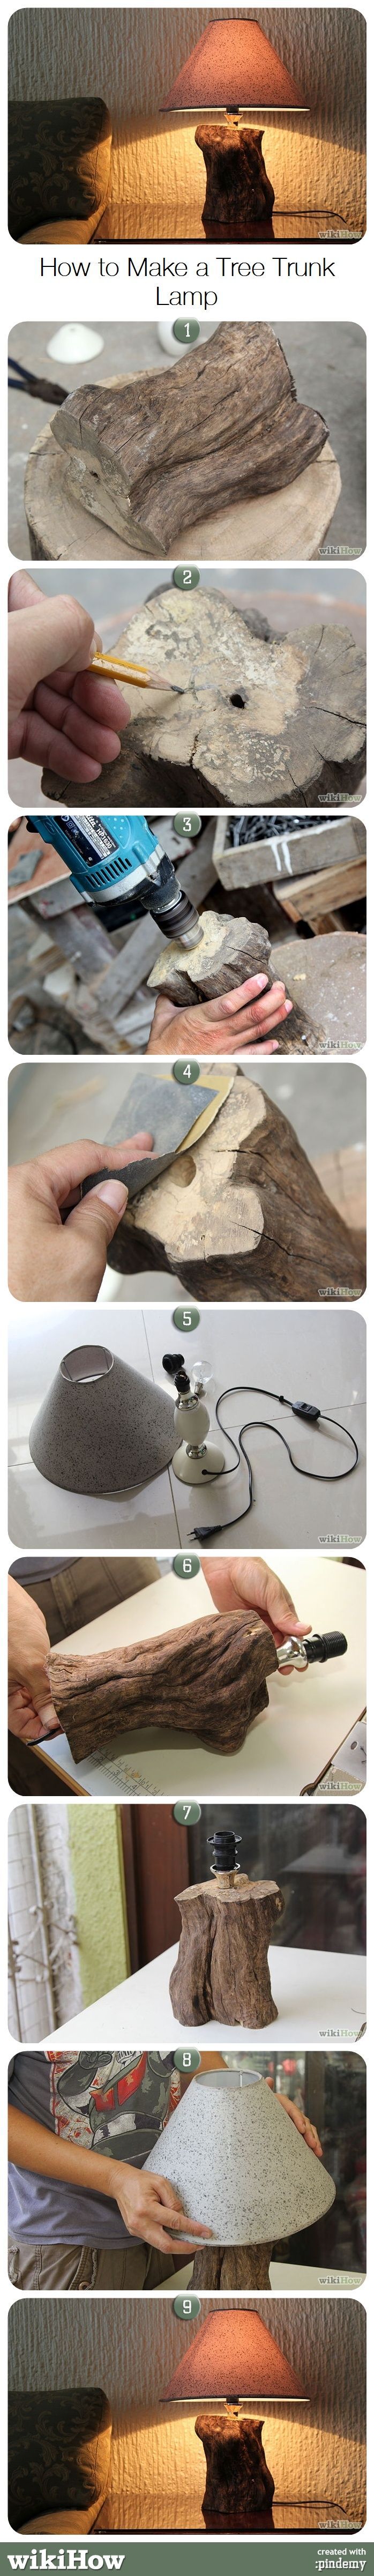 How to Make a Tree Trunk Lamp